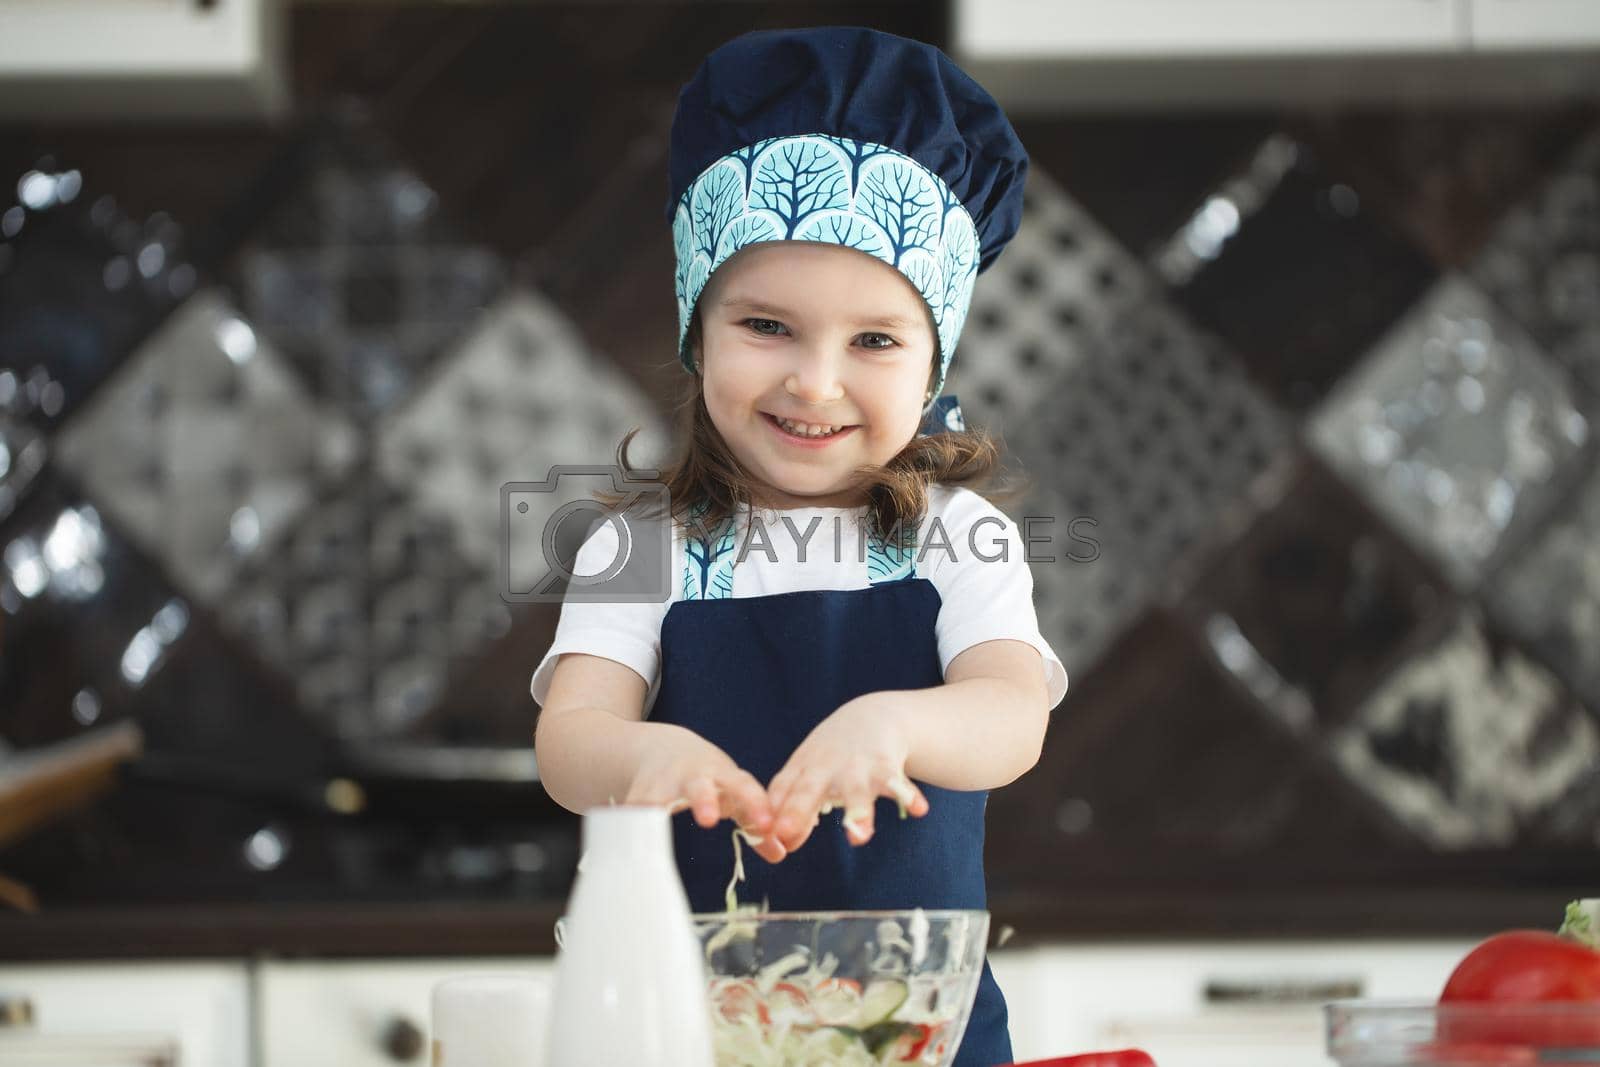 Royalty free image of A child in an apron and a Chef's hat is stirring a vegetable salad in the kitchen and looking at the camera by StudioPeace